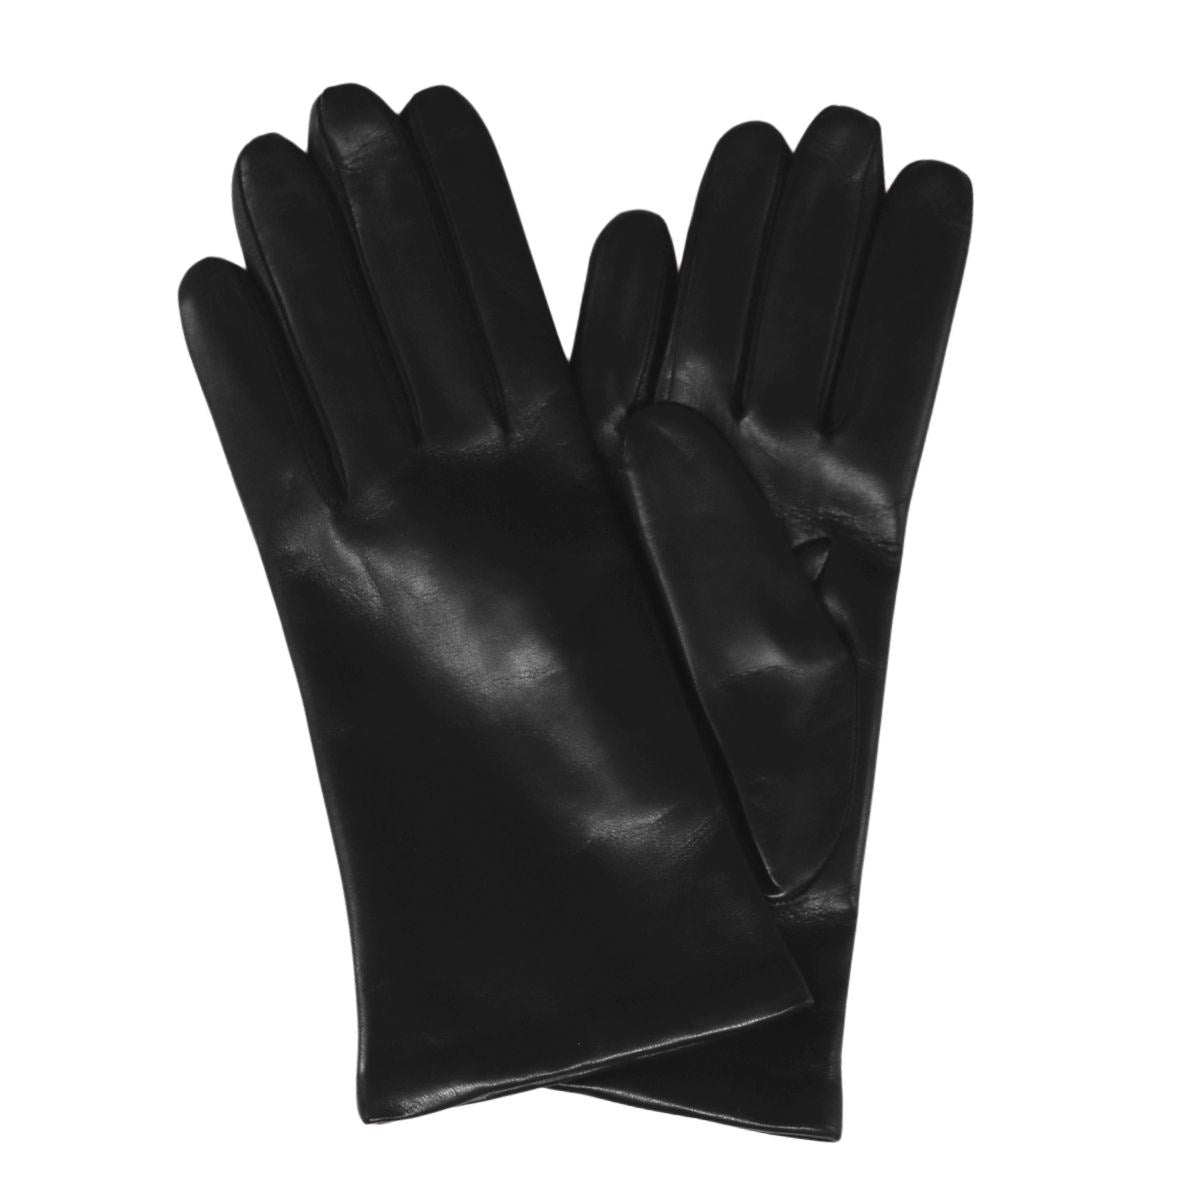 Woman Fashion Nappa leather gloves 2bt,cashmere